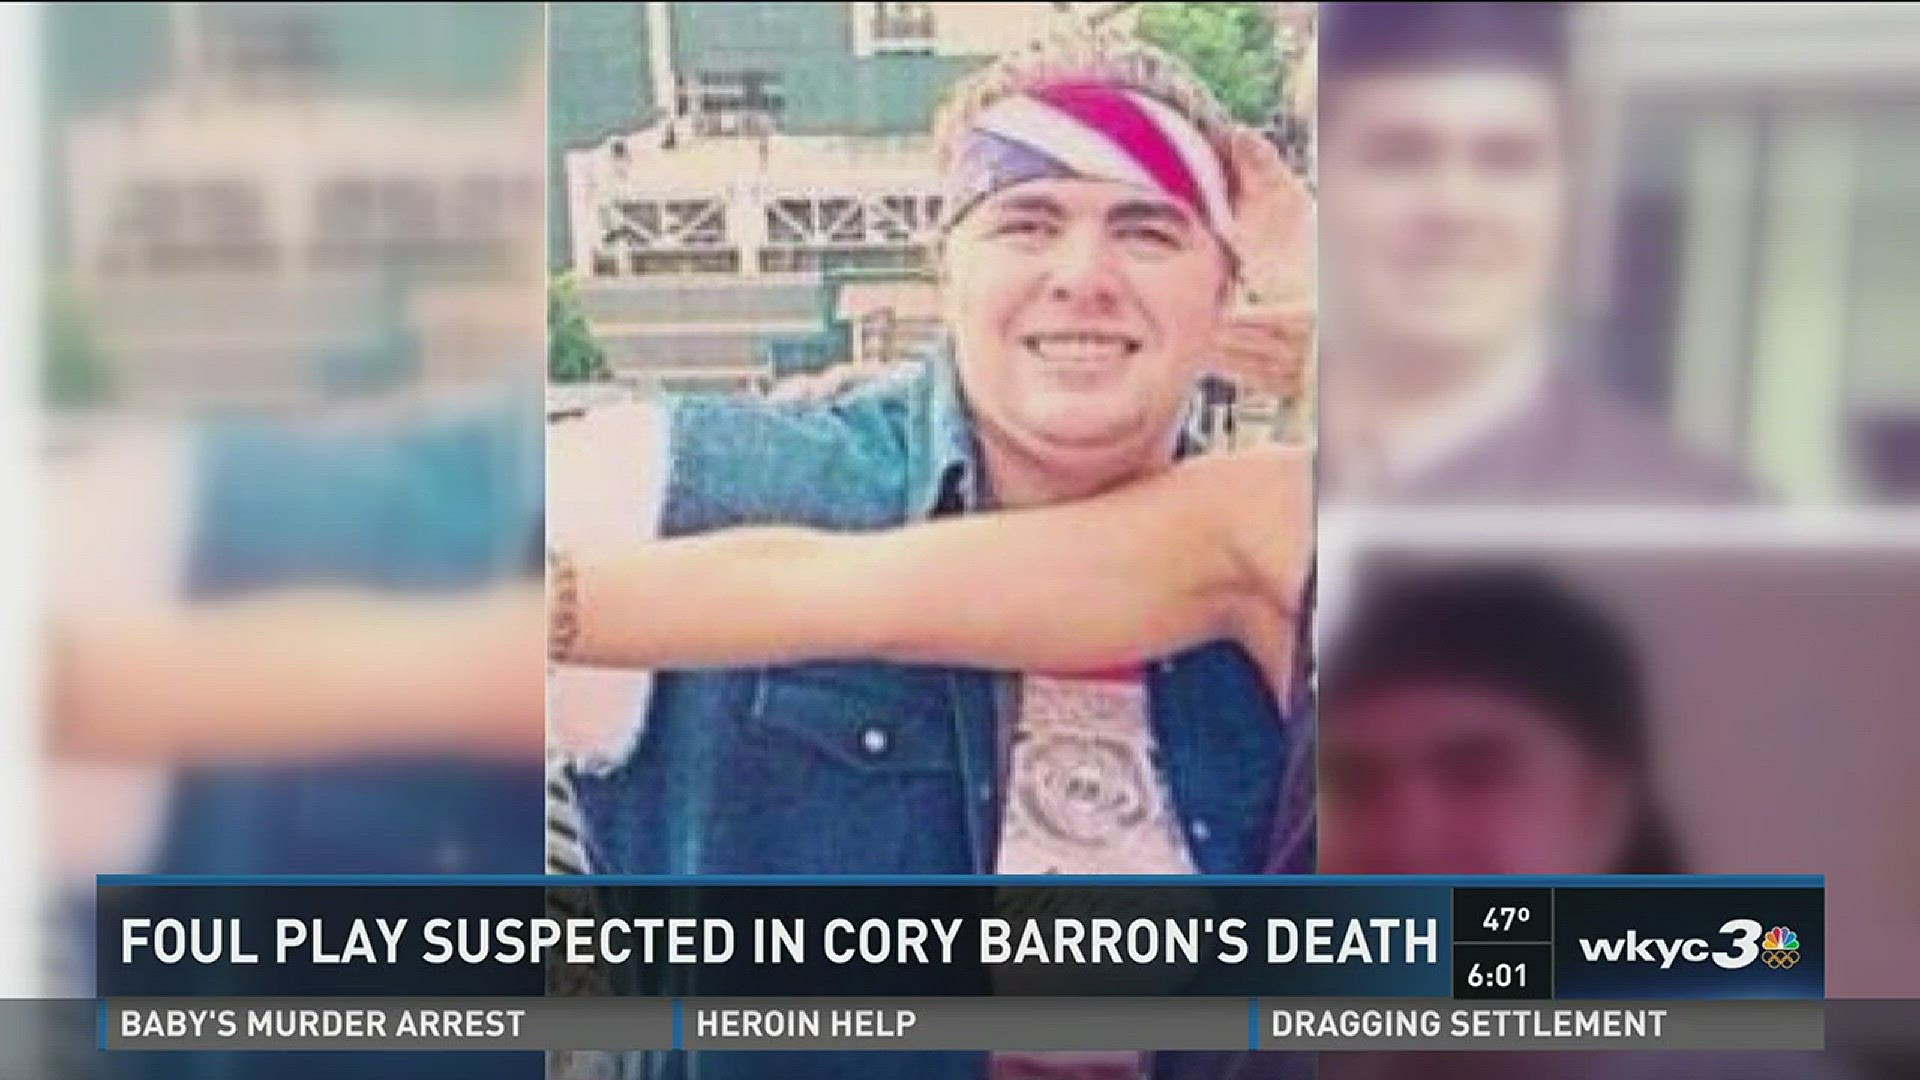 Foul play suspected in Cory Barron's death